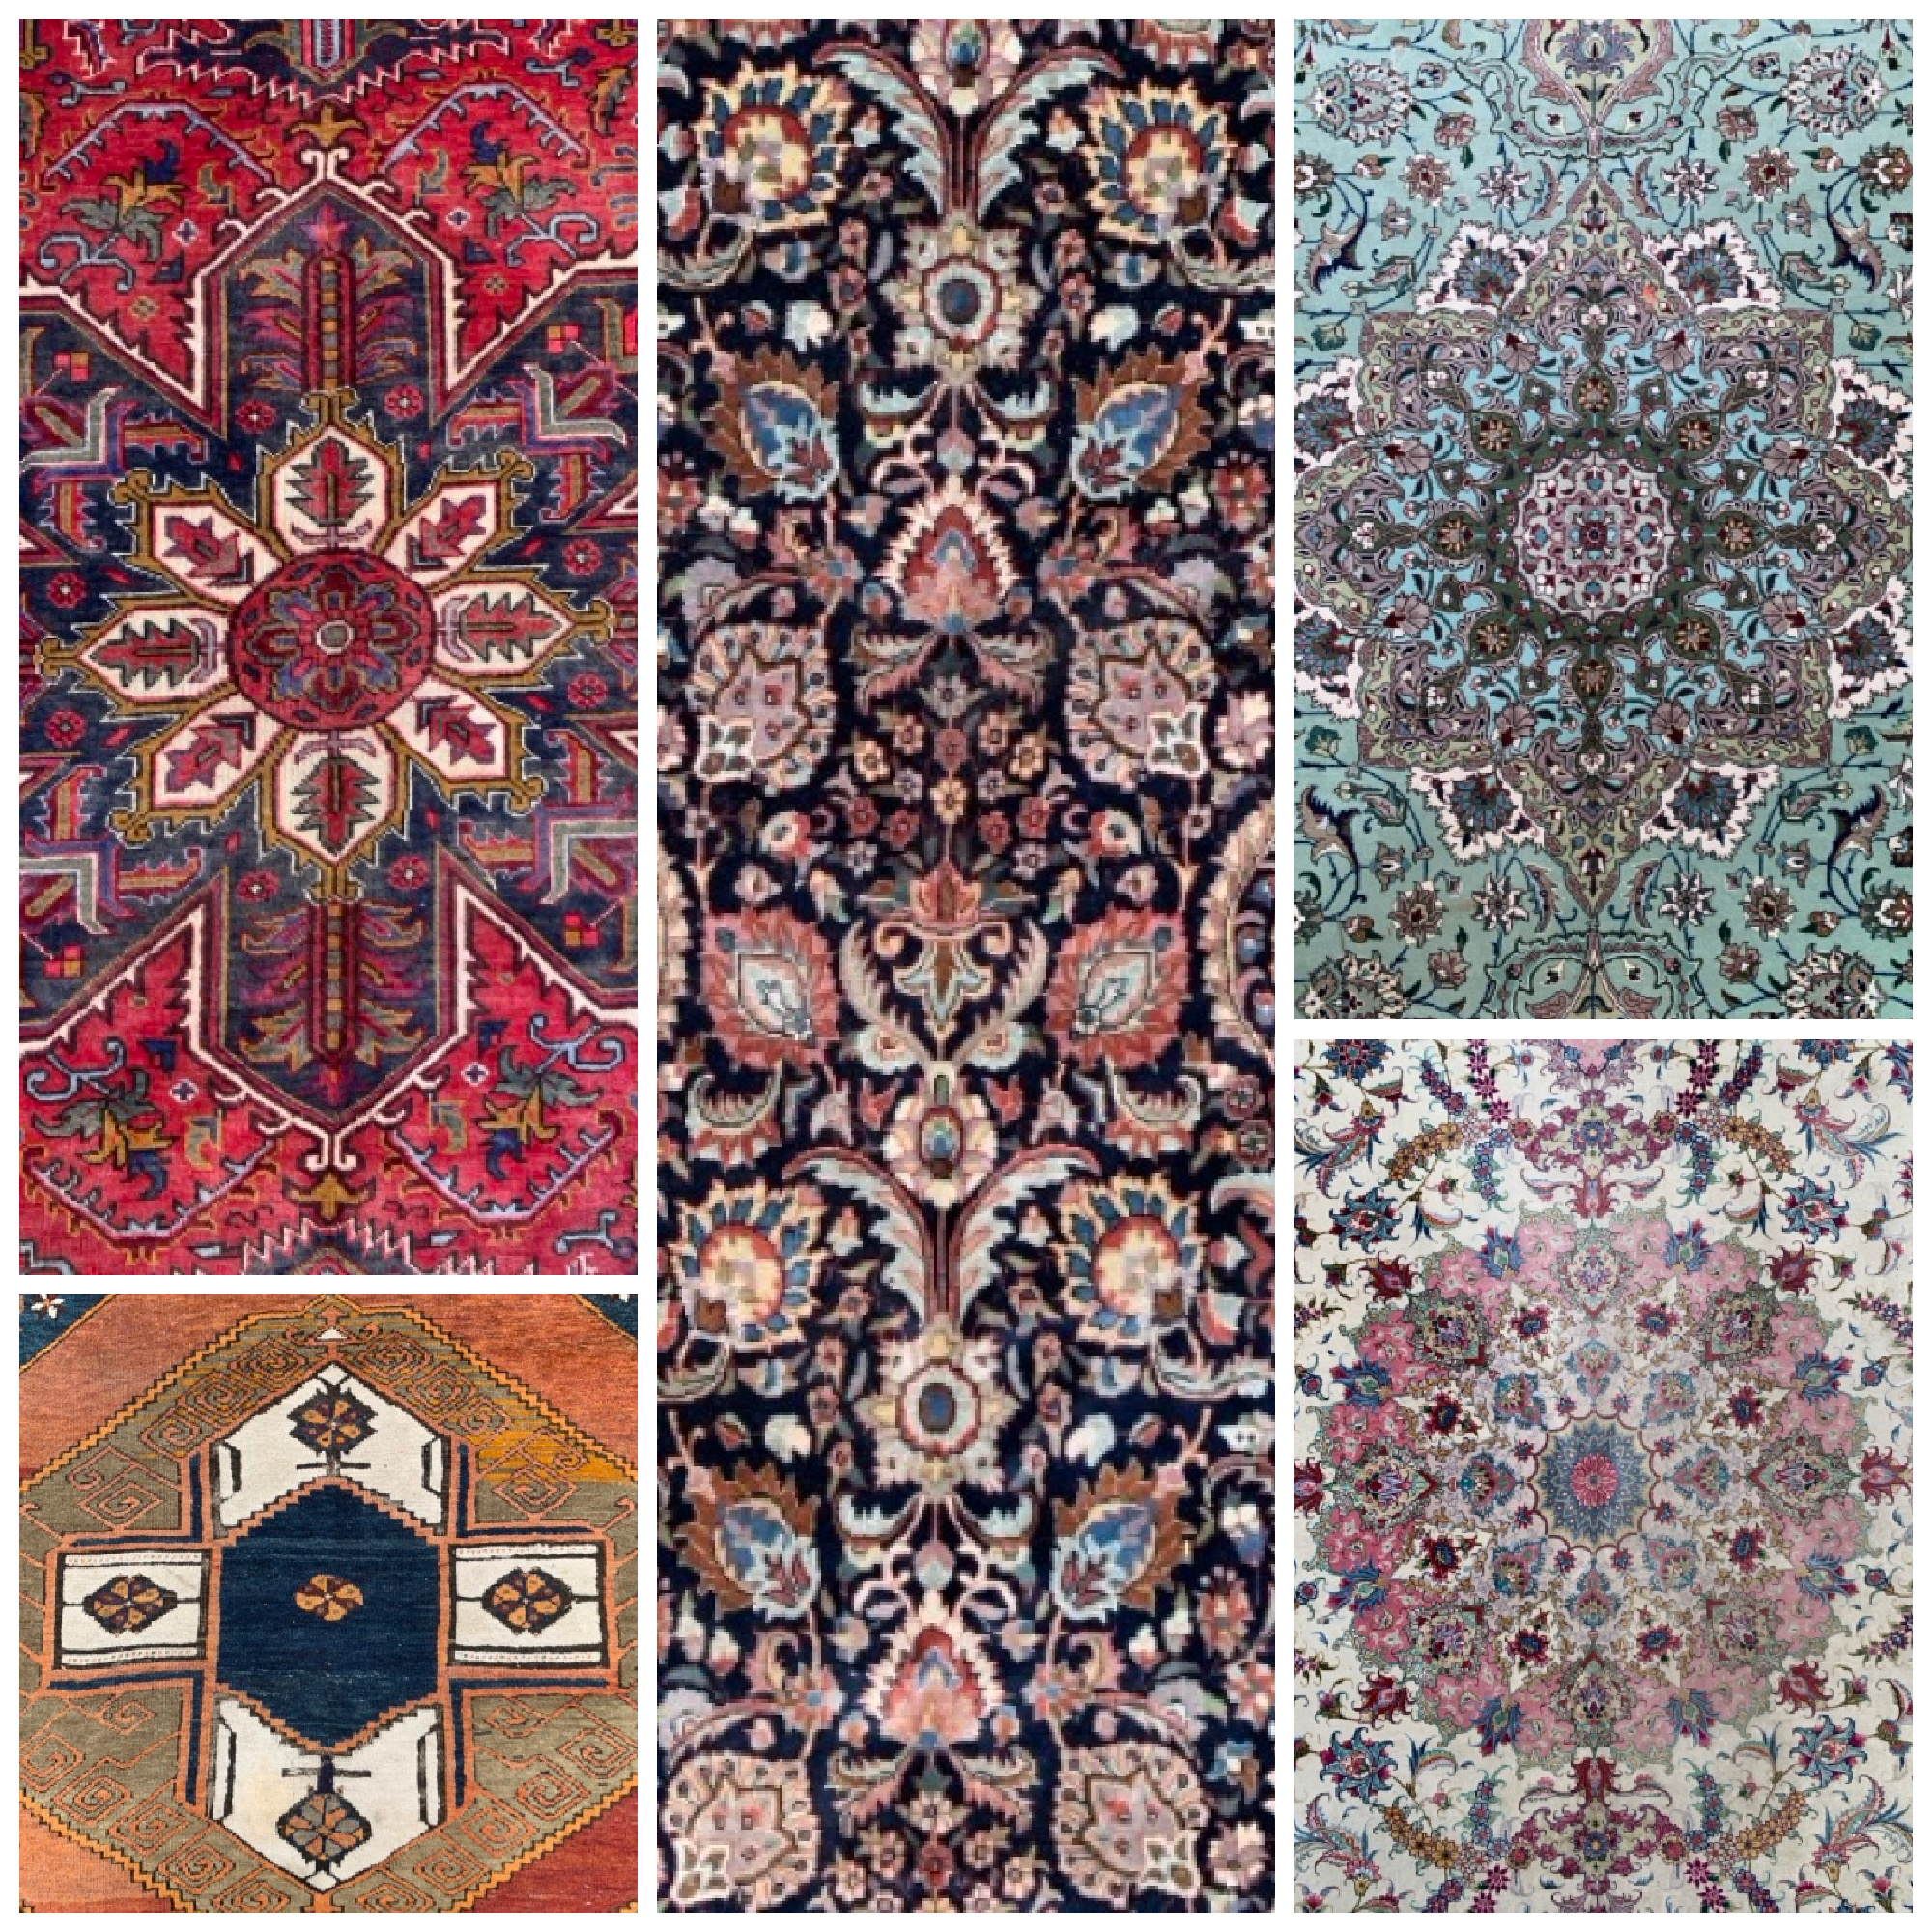 Winer Rug Auction- Coming Soon!